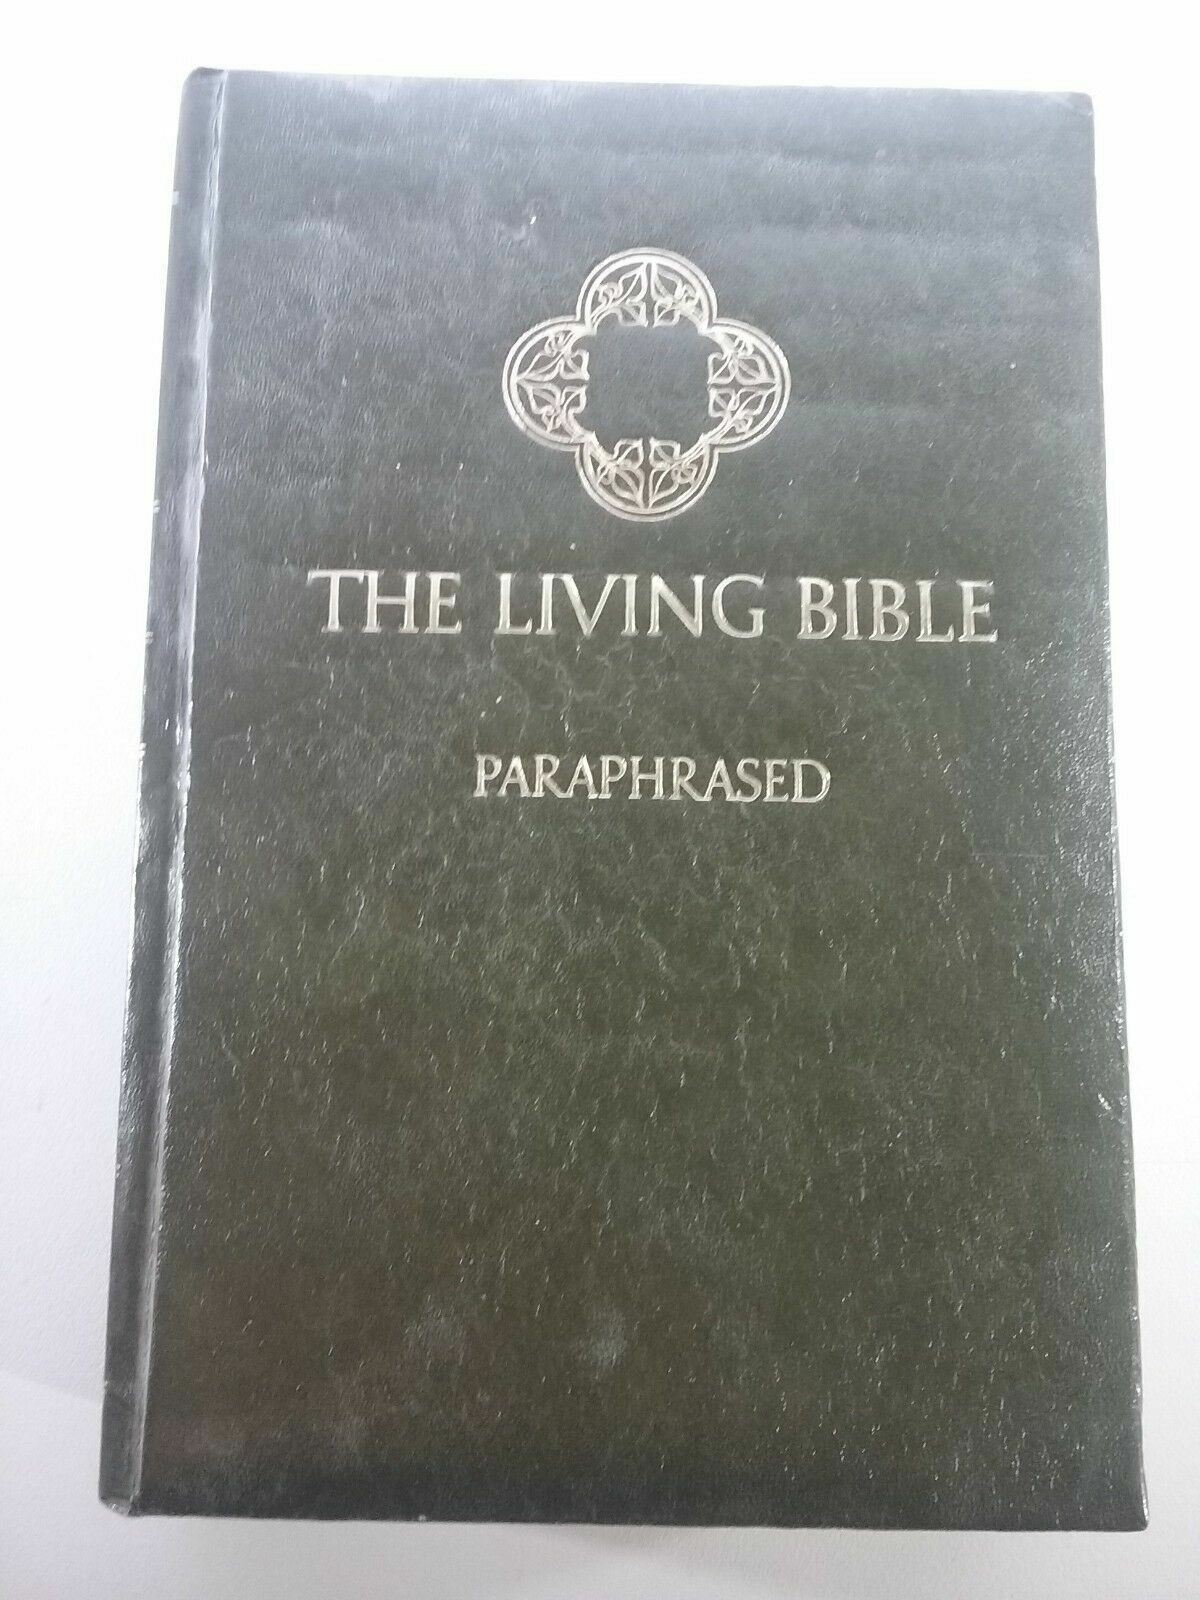 Living Bible Paraphrased Tyndale ISBN: 842322507 Hardcover 1972 13th Printing